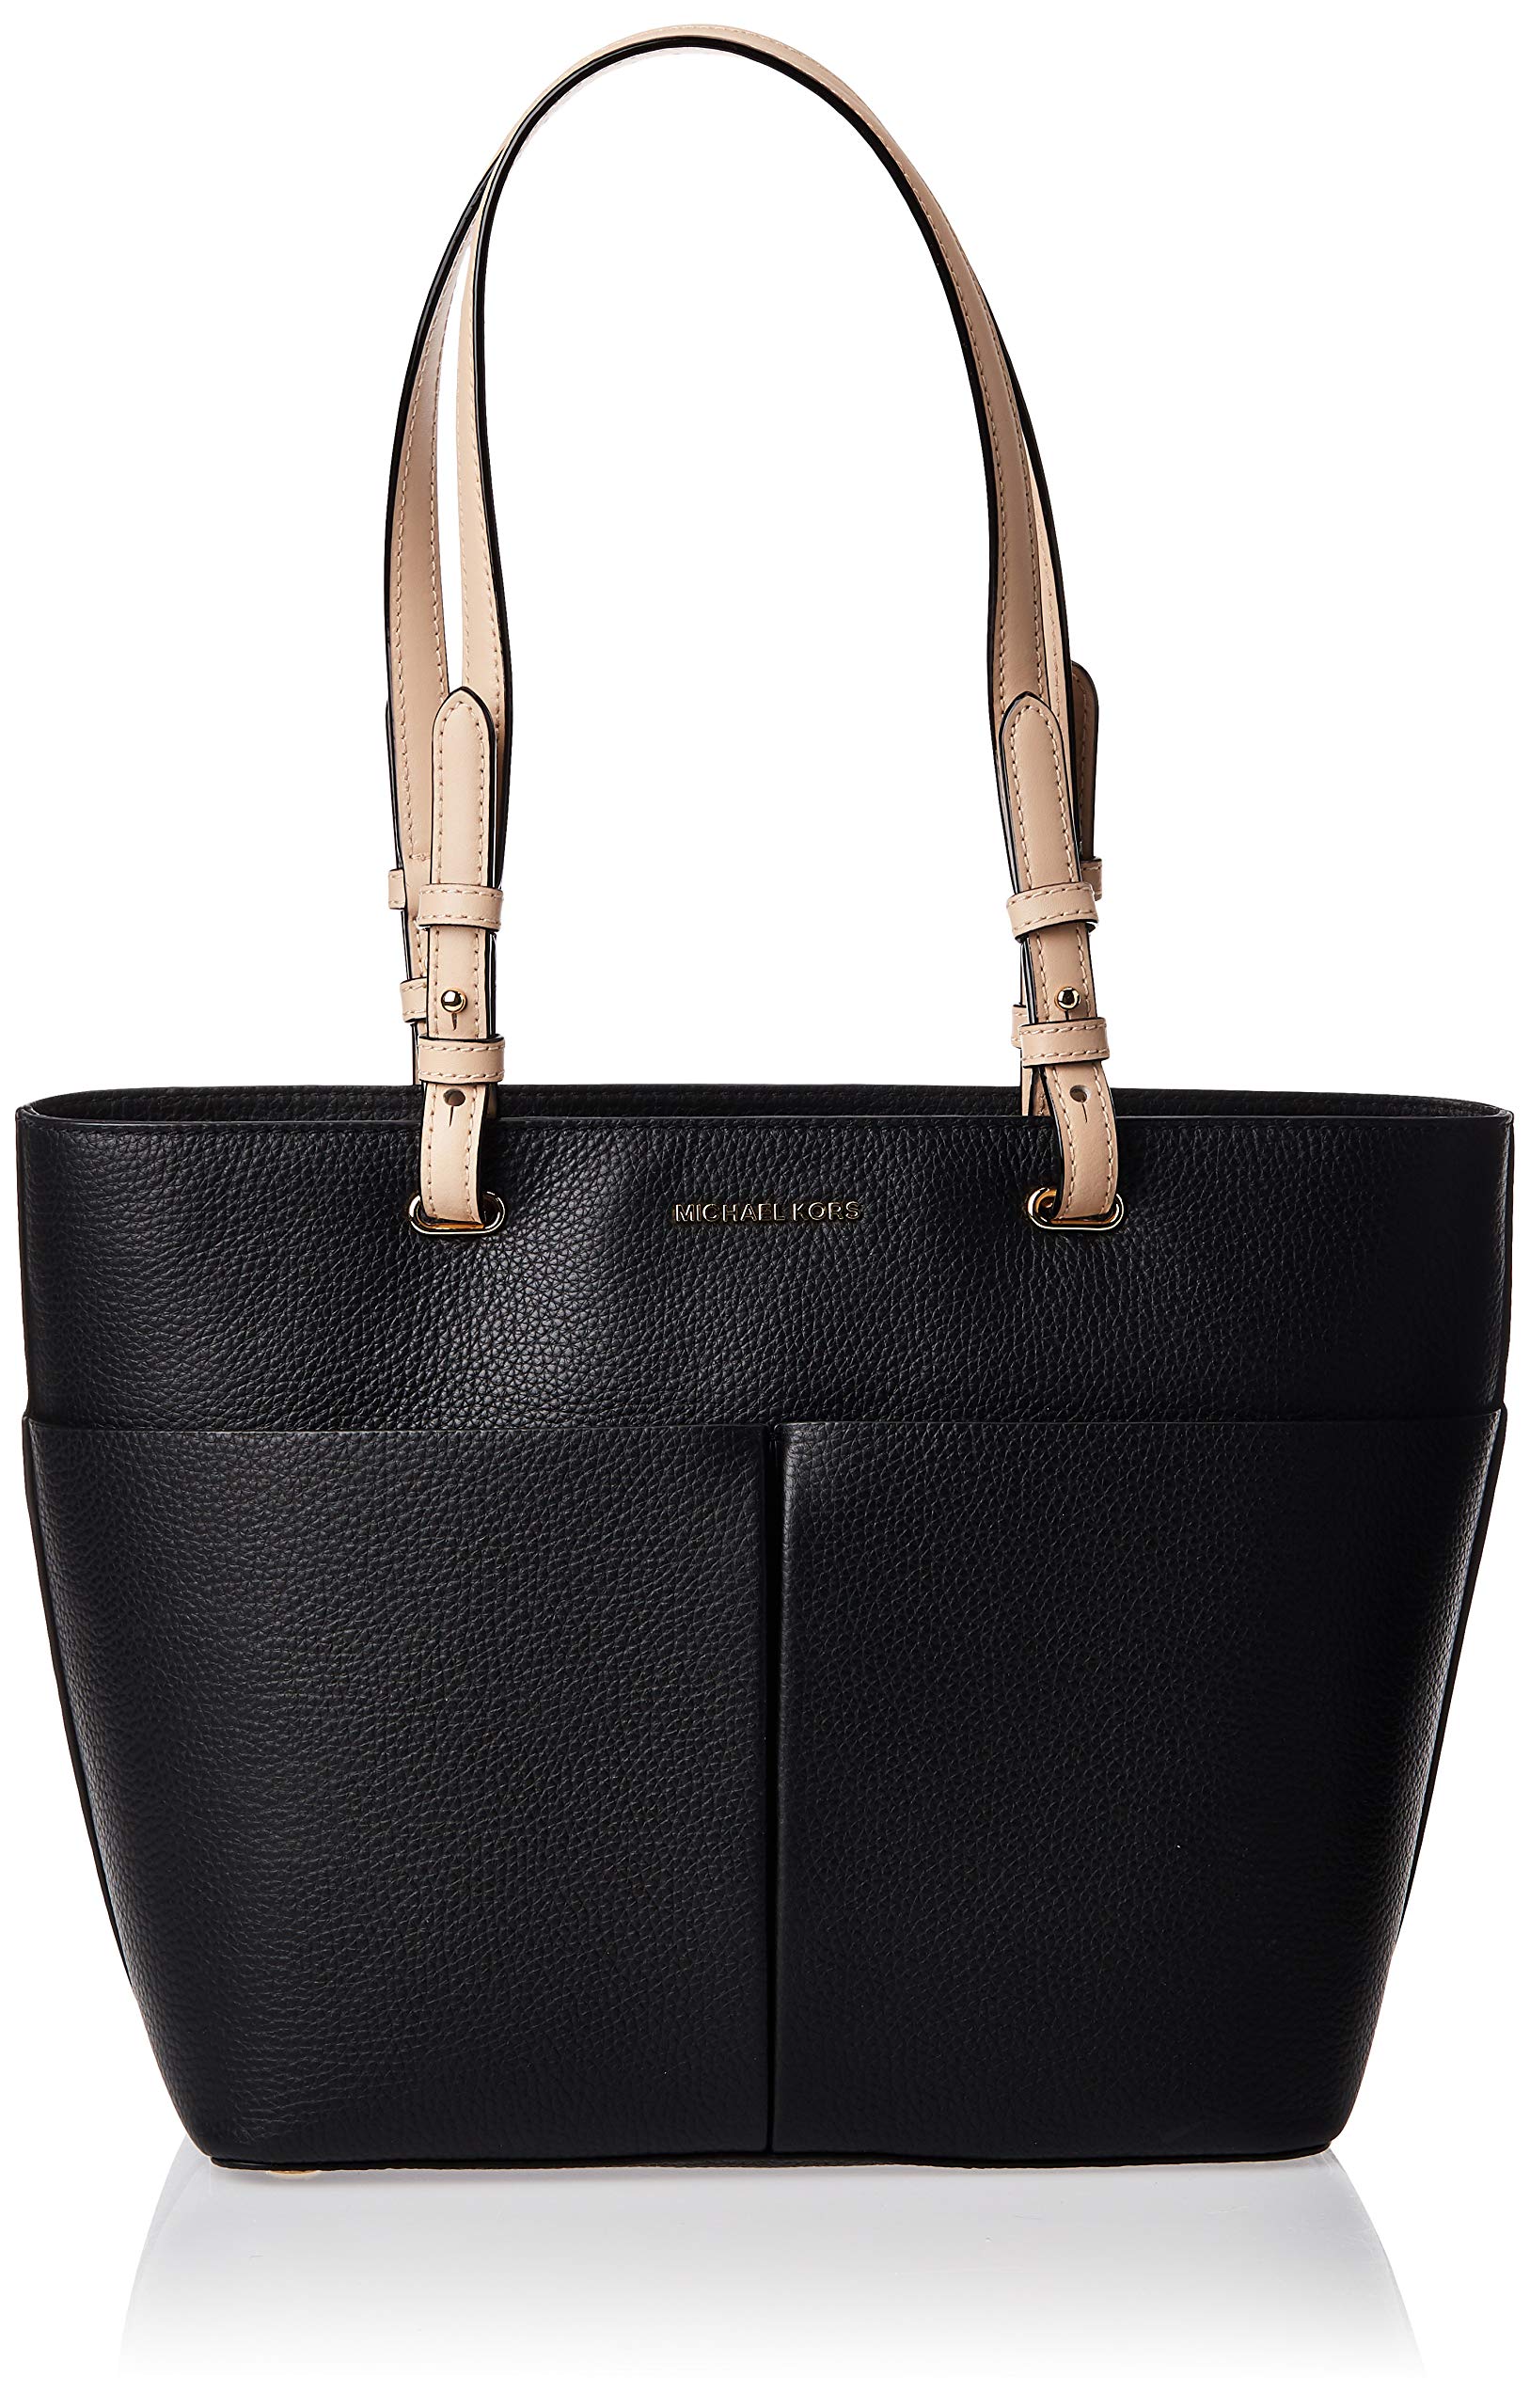 Designer Tote Bags For Any Occasion  Michael Kors